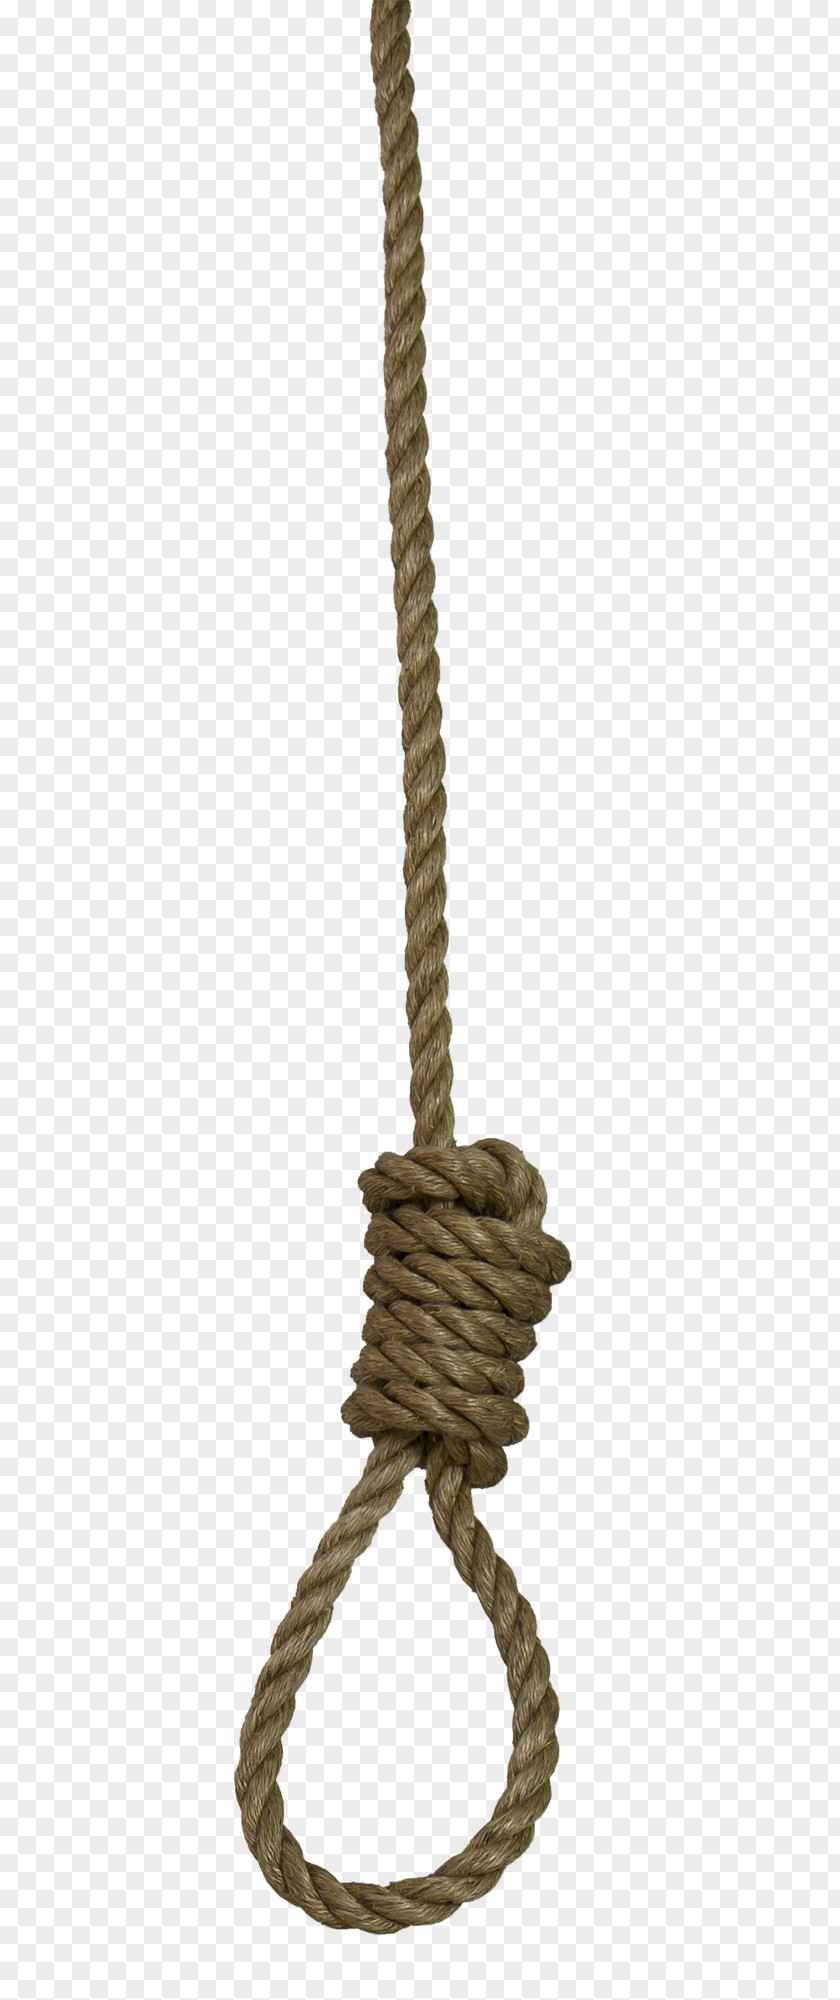 A Rope Noose Knot PNG